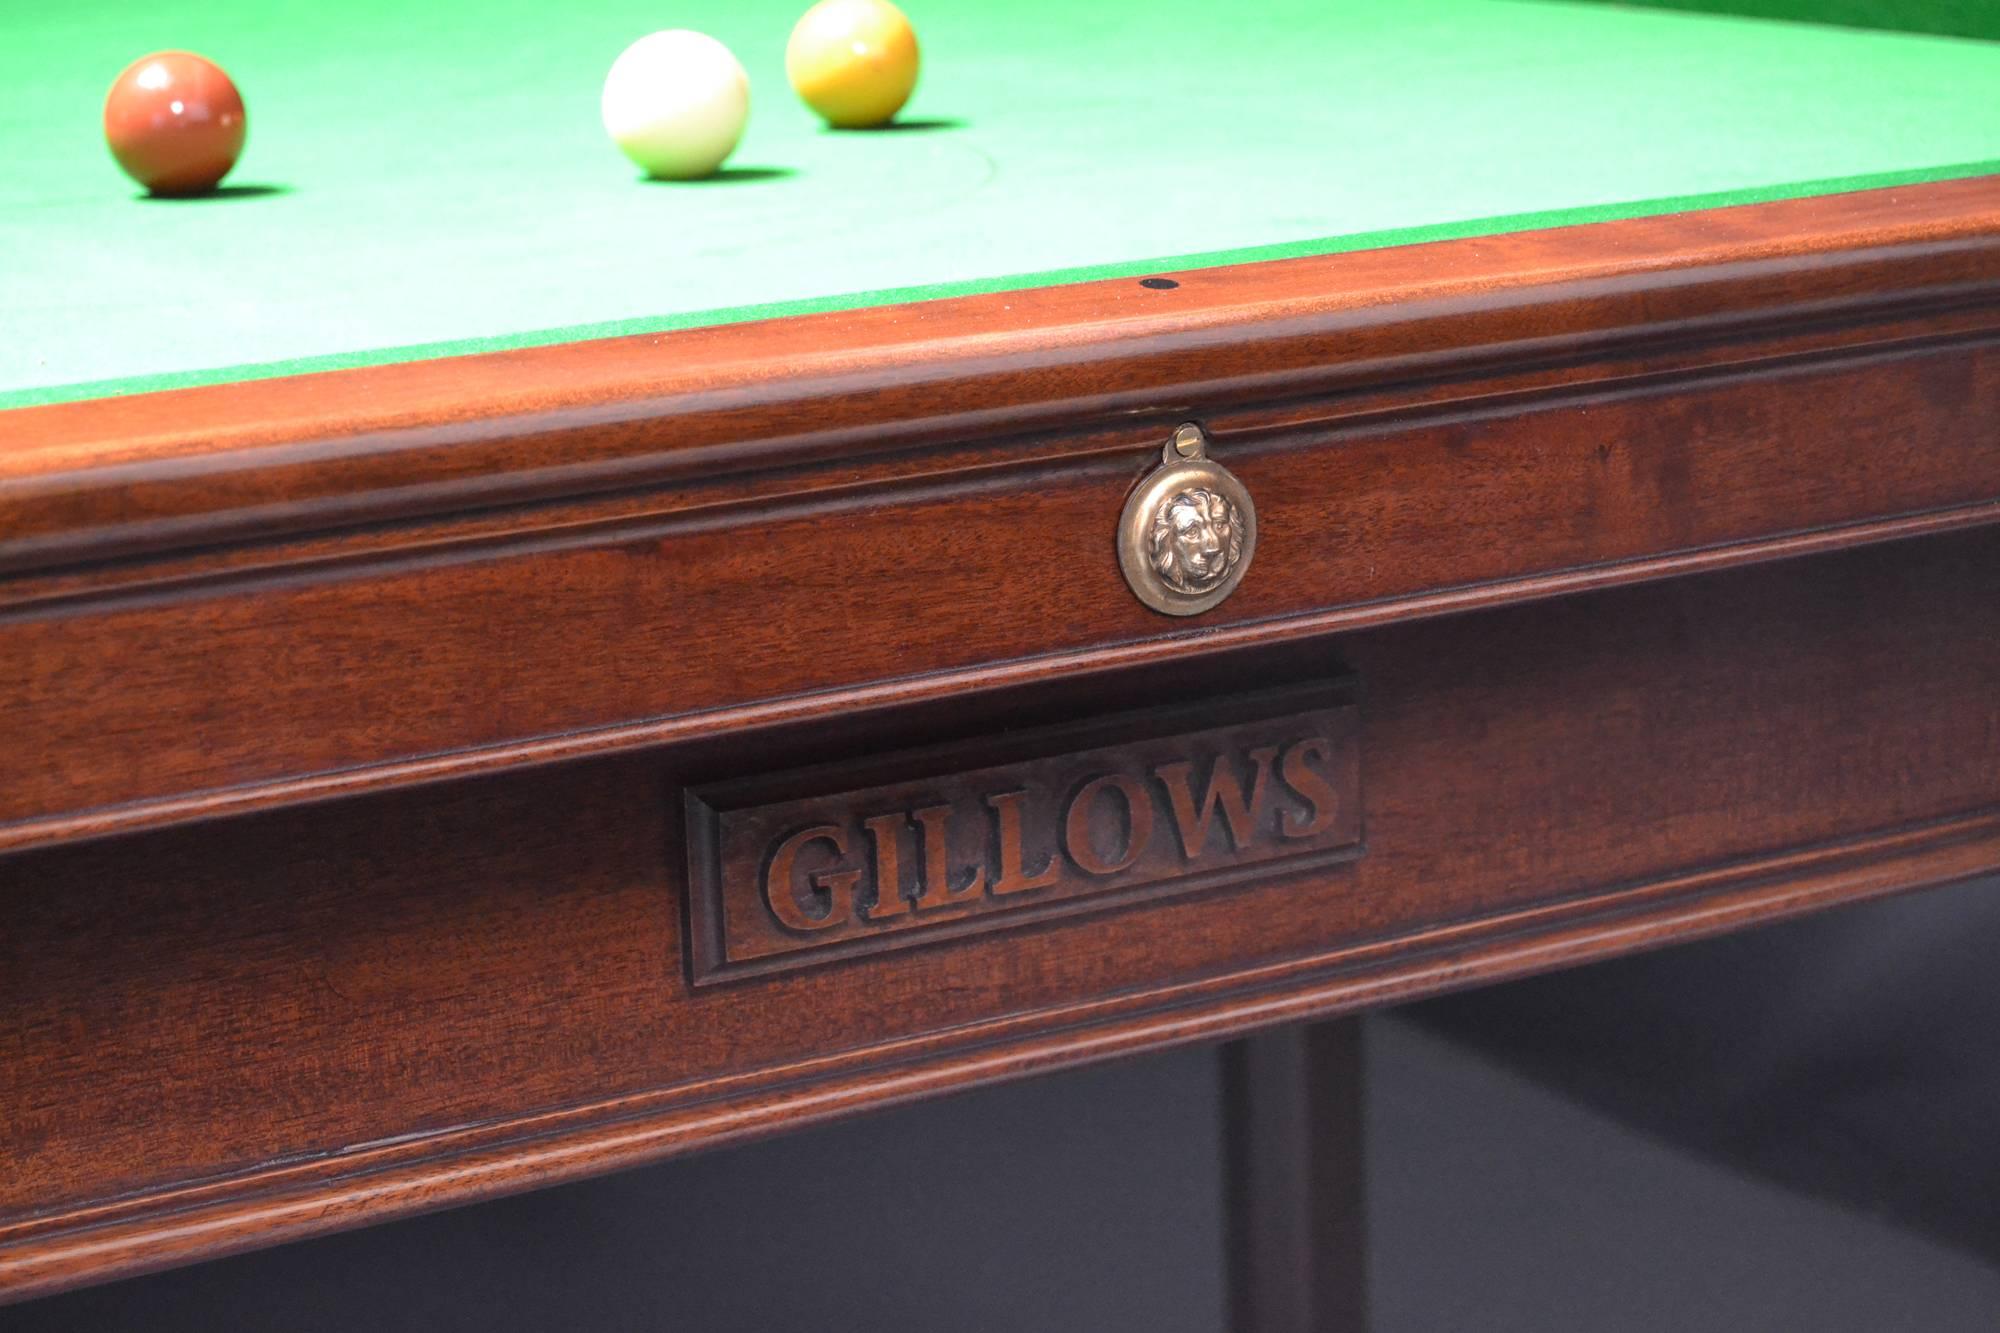 A rare 10ft x 5ft Billiard or Snooker table in the Gainsborough manner by Gillow's of Lancaster circa 1800, standing on eight elegant chamfered and shaped legs, with brass mounts fitted to the frame, legs and cushion friezes.
The simple but